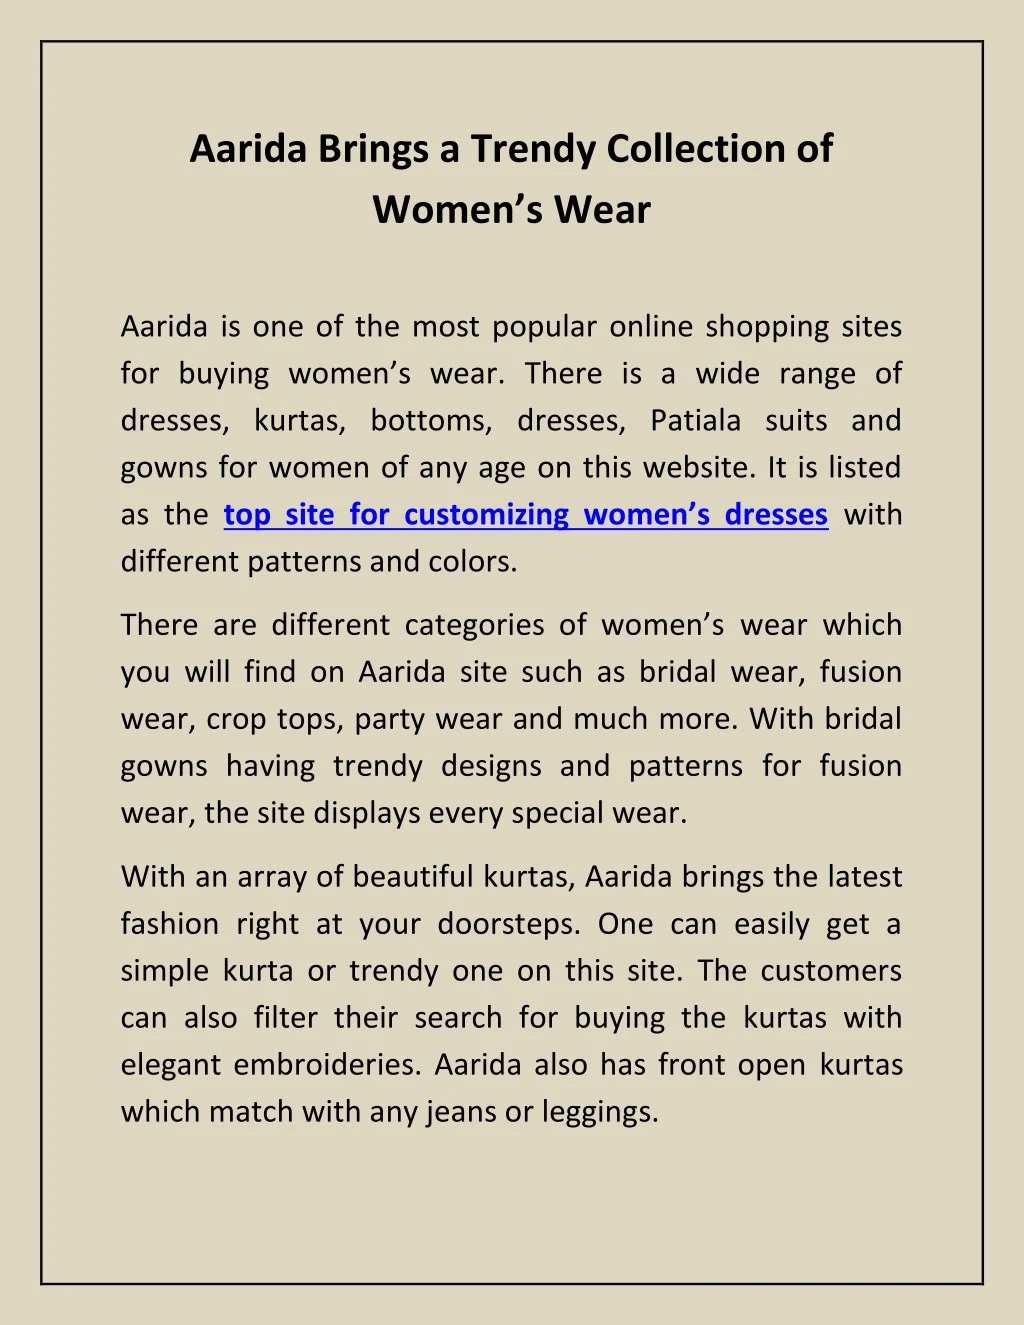 aarida brings a trendy collection of women s wear